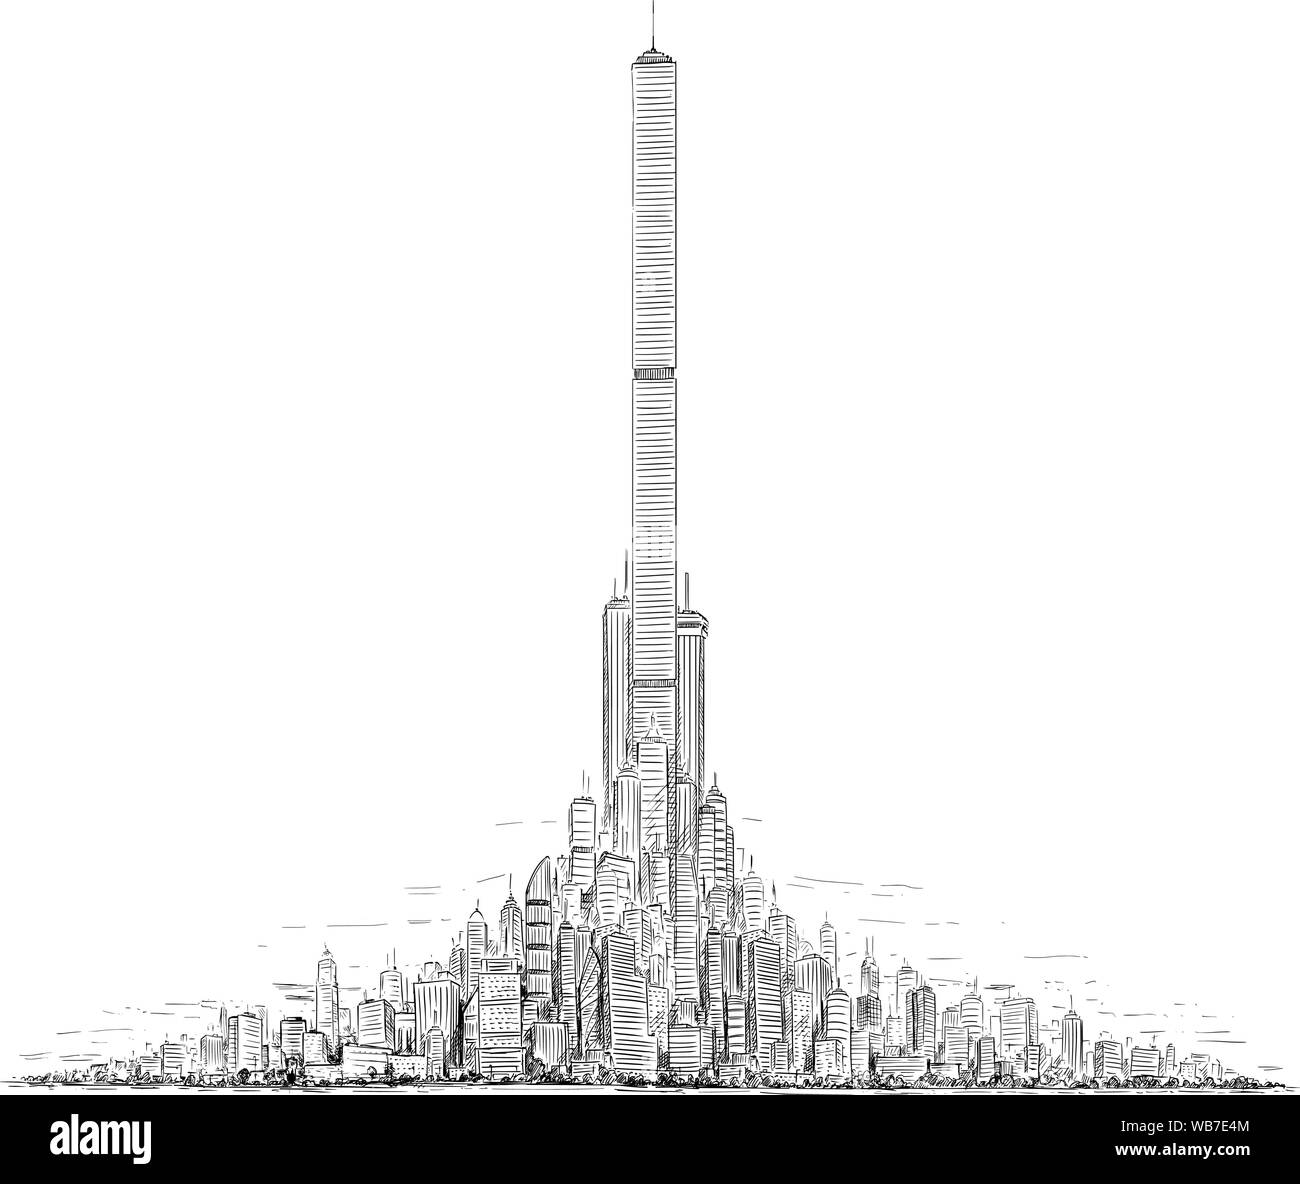 Vector artistic sketchy pen and ink drawing illustration of generic city high rise cityscape landscape with high skyscraper buildings in center. Stock Vector